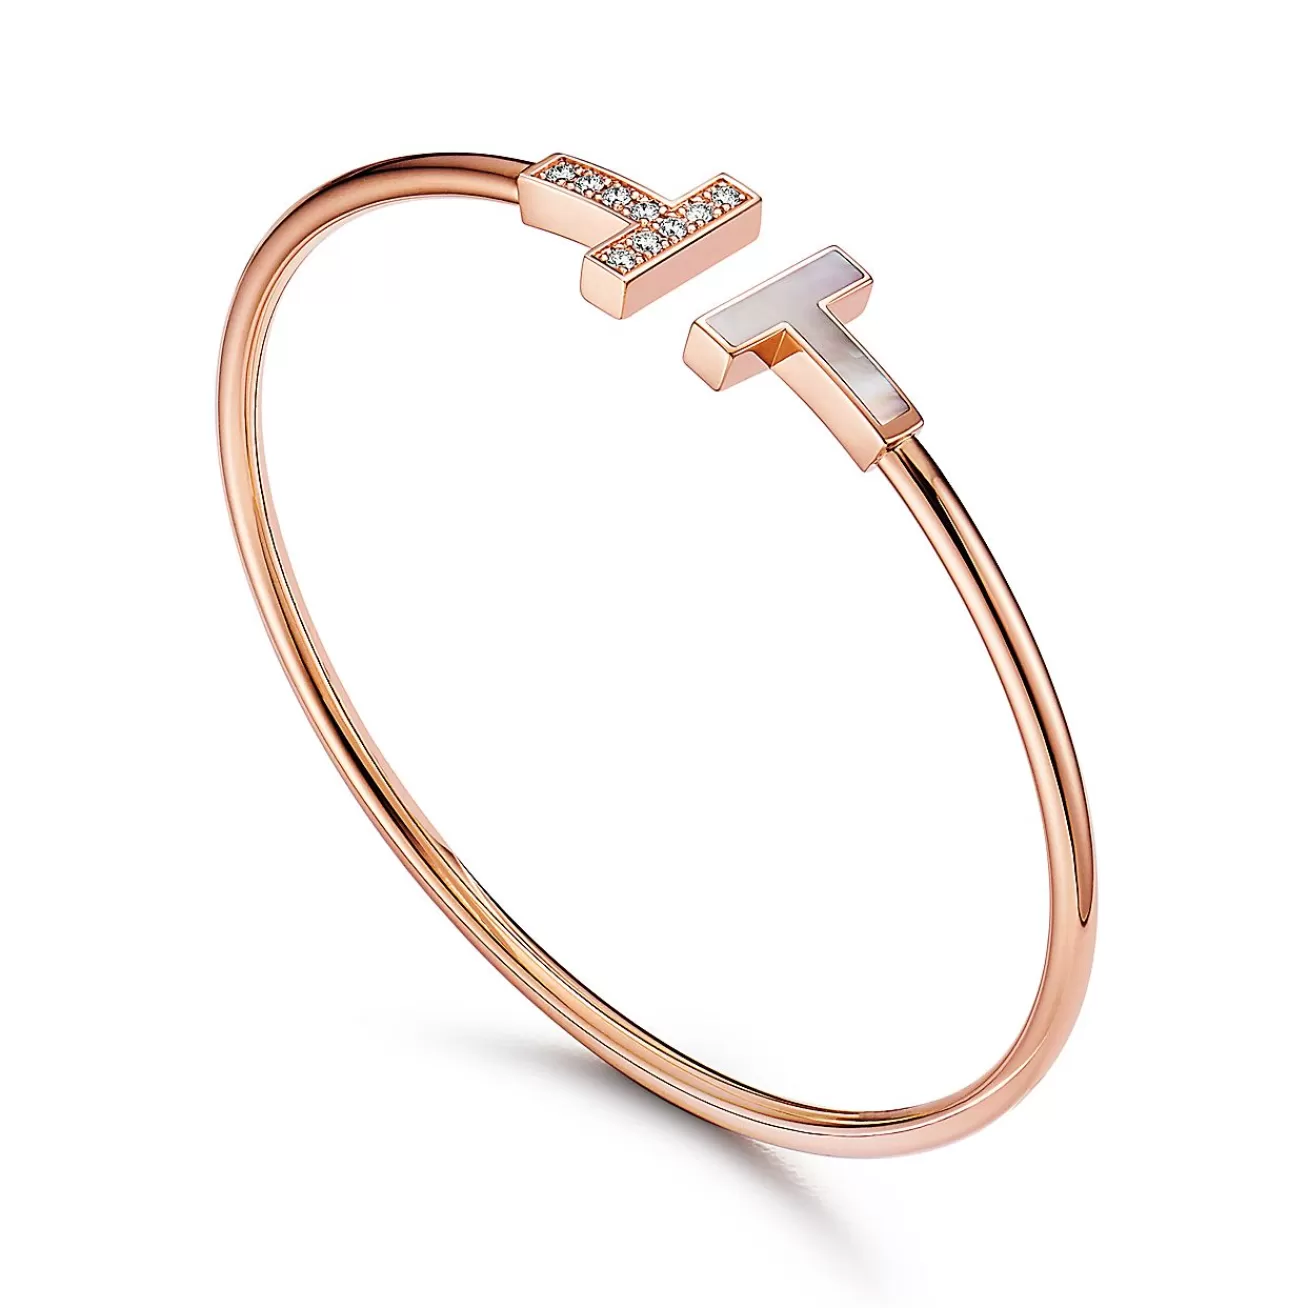 Tiffany & Co. Tiffany T Wire Bracelet in Rose Gold with Diamonds and Mother-of-pearl | ^ Bracelets | Gifts for Her